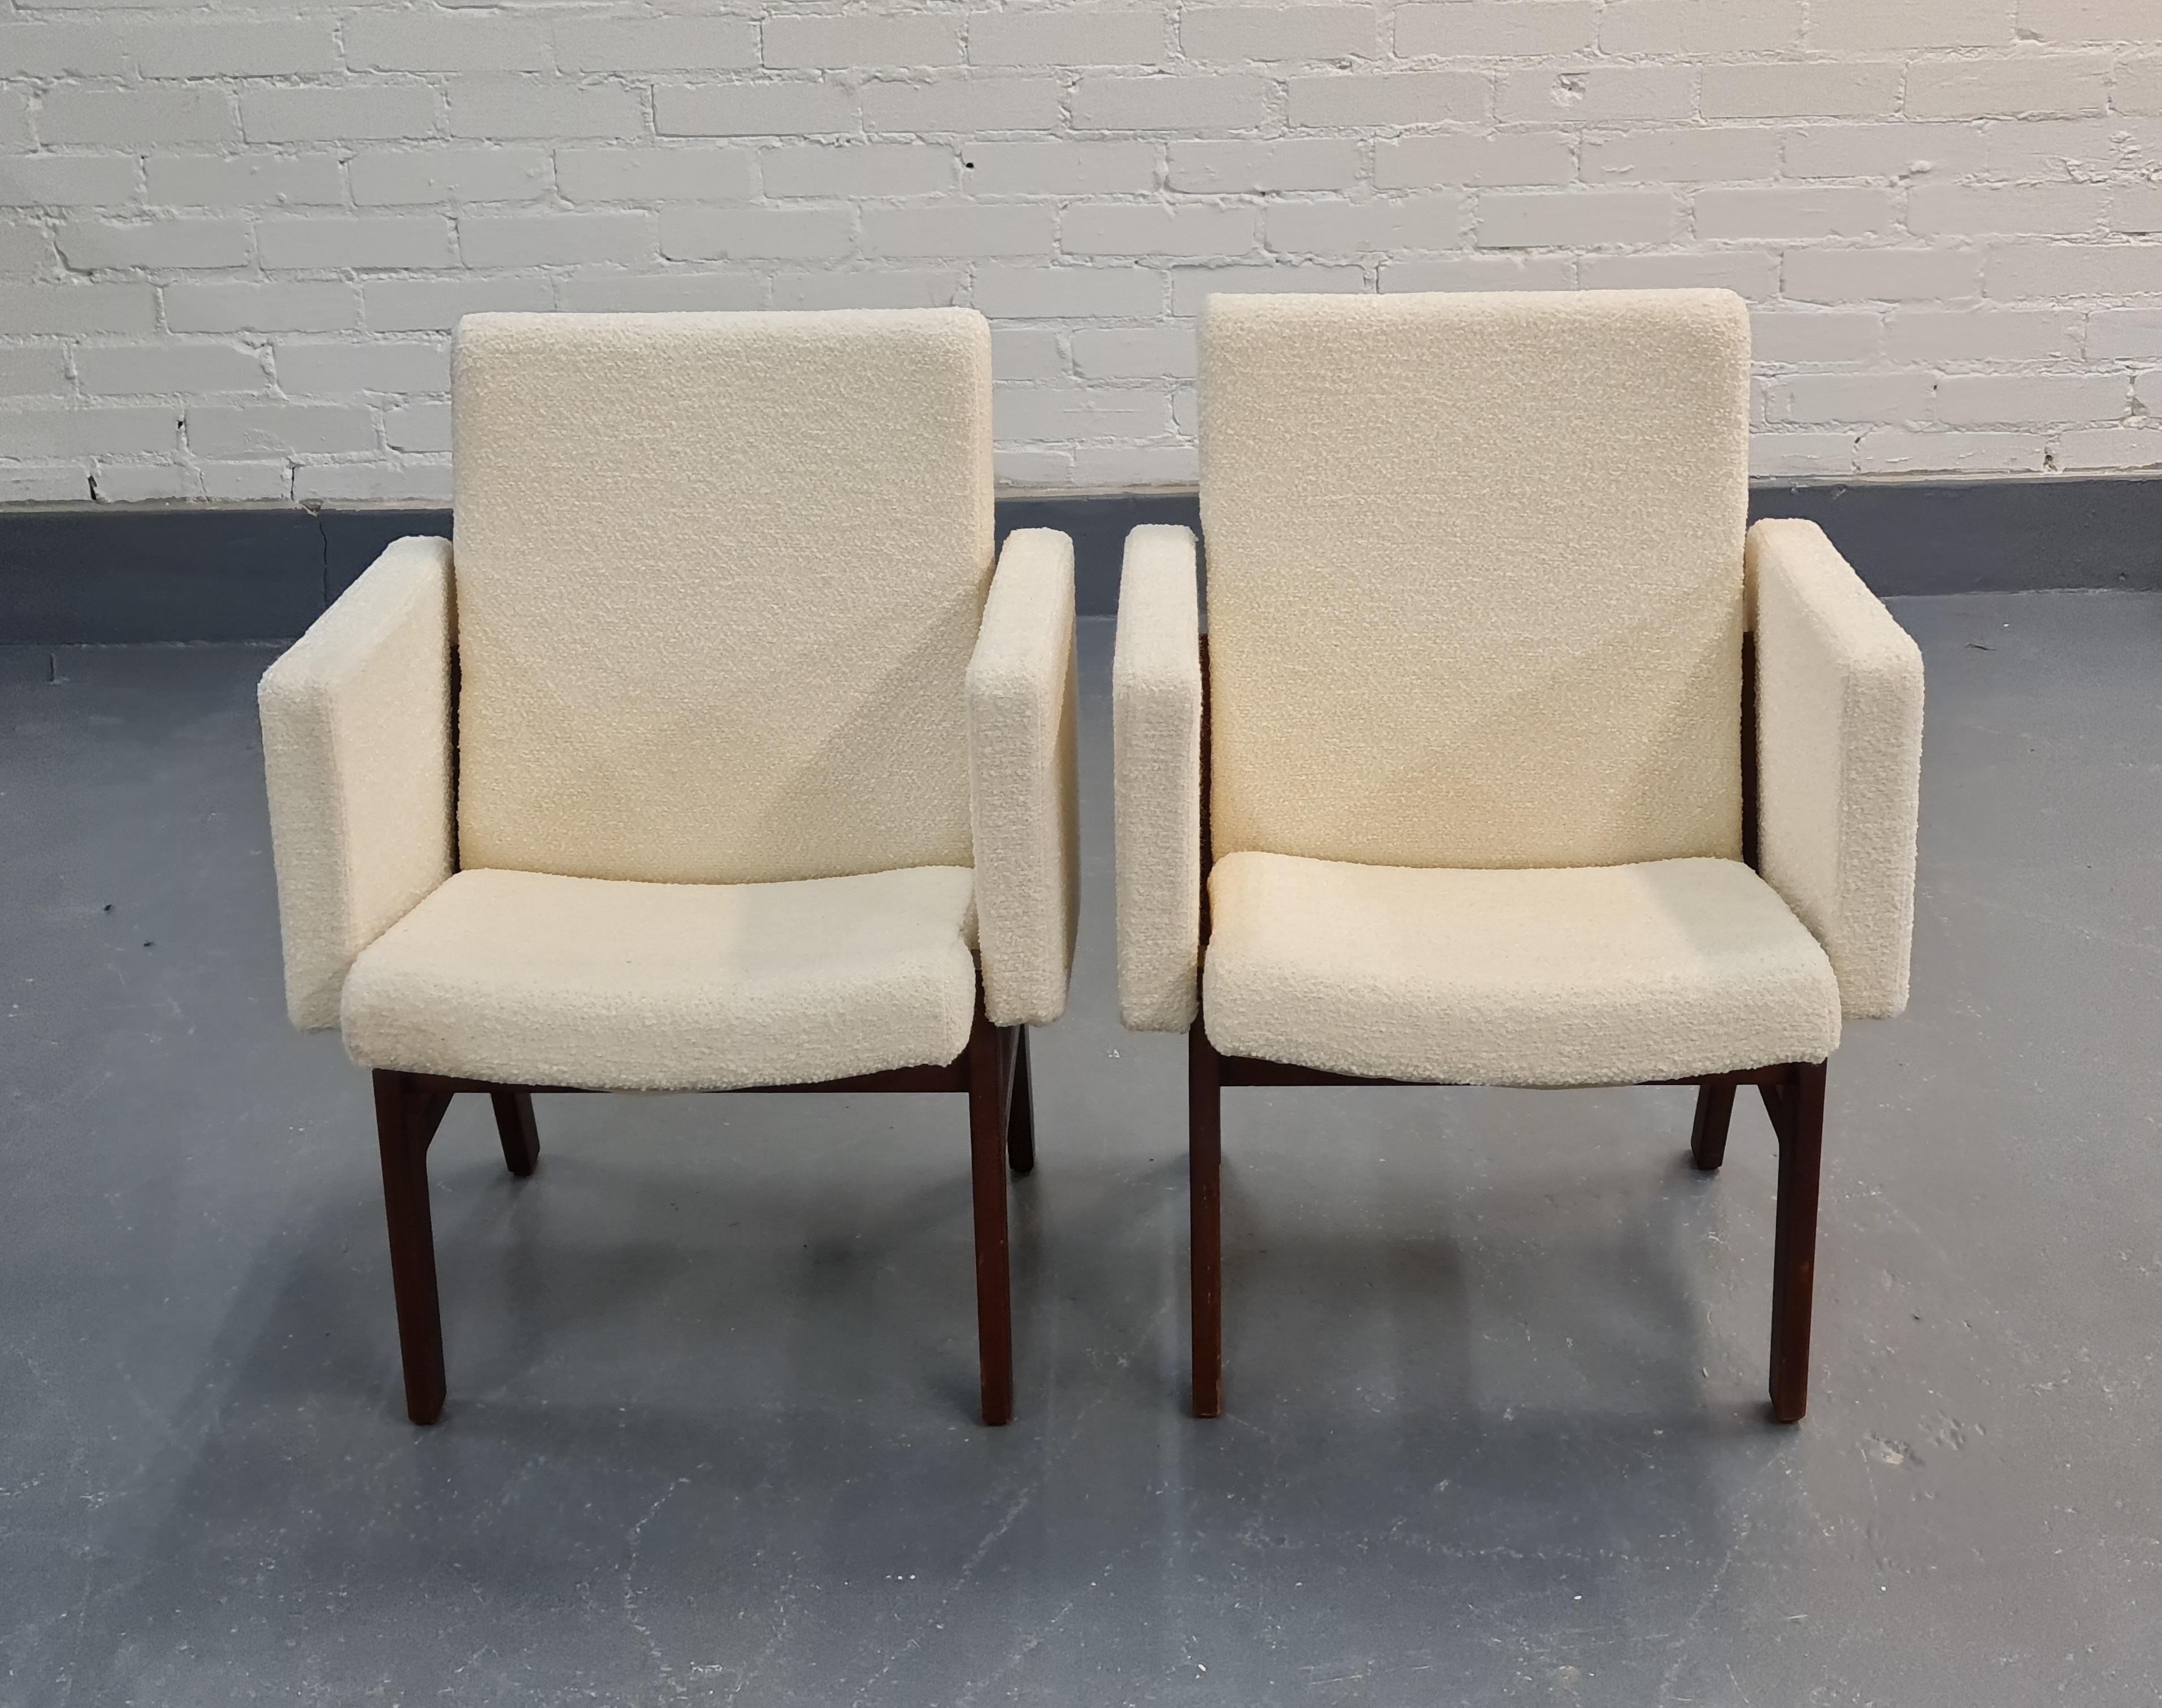 A pair of compact and pragmatic armchairs designed by Antti Nurmesniemi, and reupholstered in beautiful white wool fabric. Both chairs have sustained a great condition although they are from as far back as the 1950s. The chairs were originally in